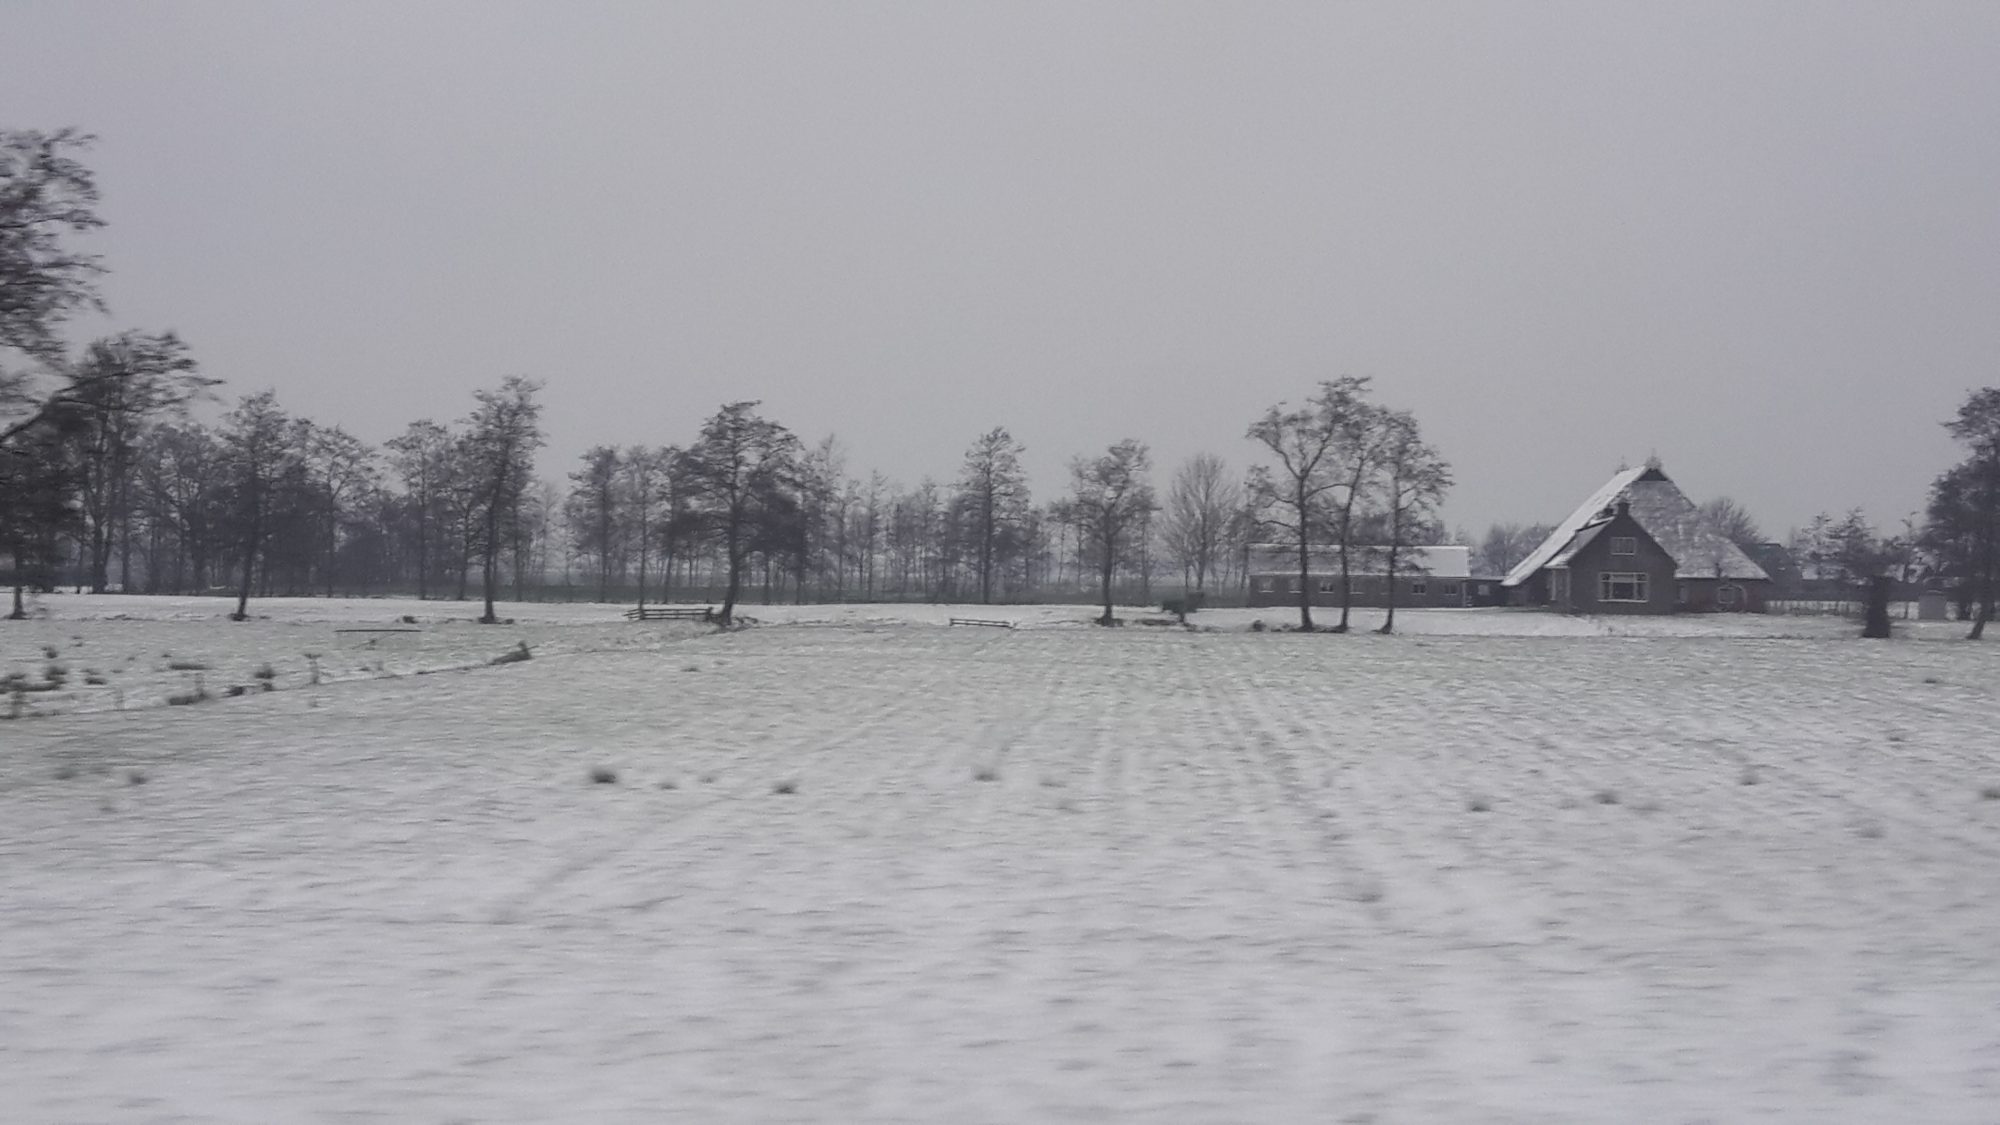 somewhere on my commute between Groningen and Leeuwarden after a dusting of snow